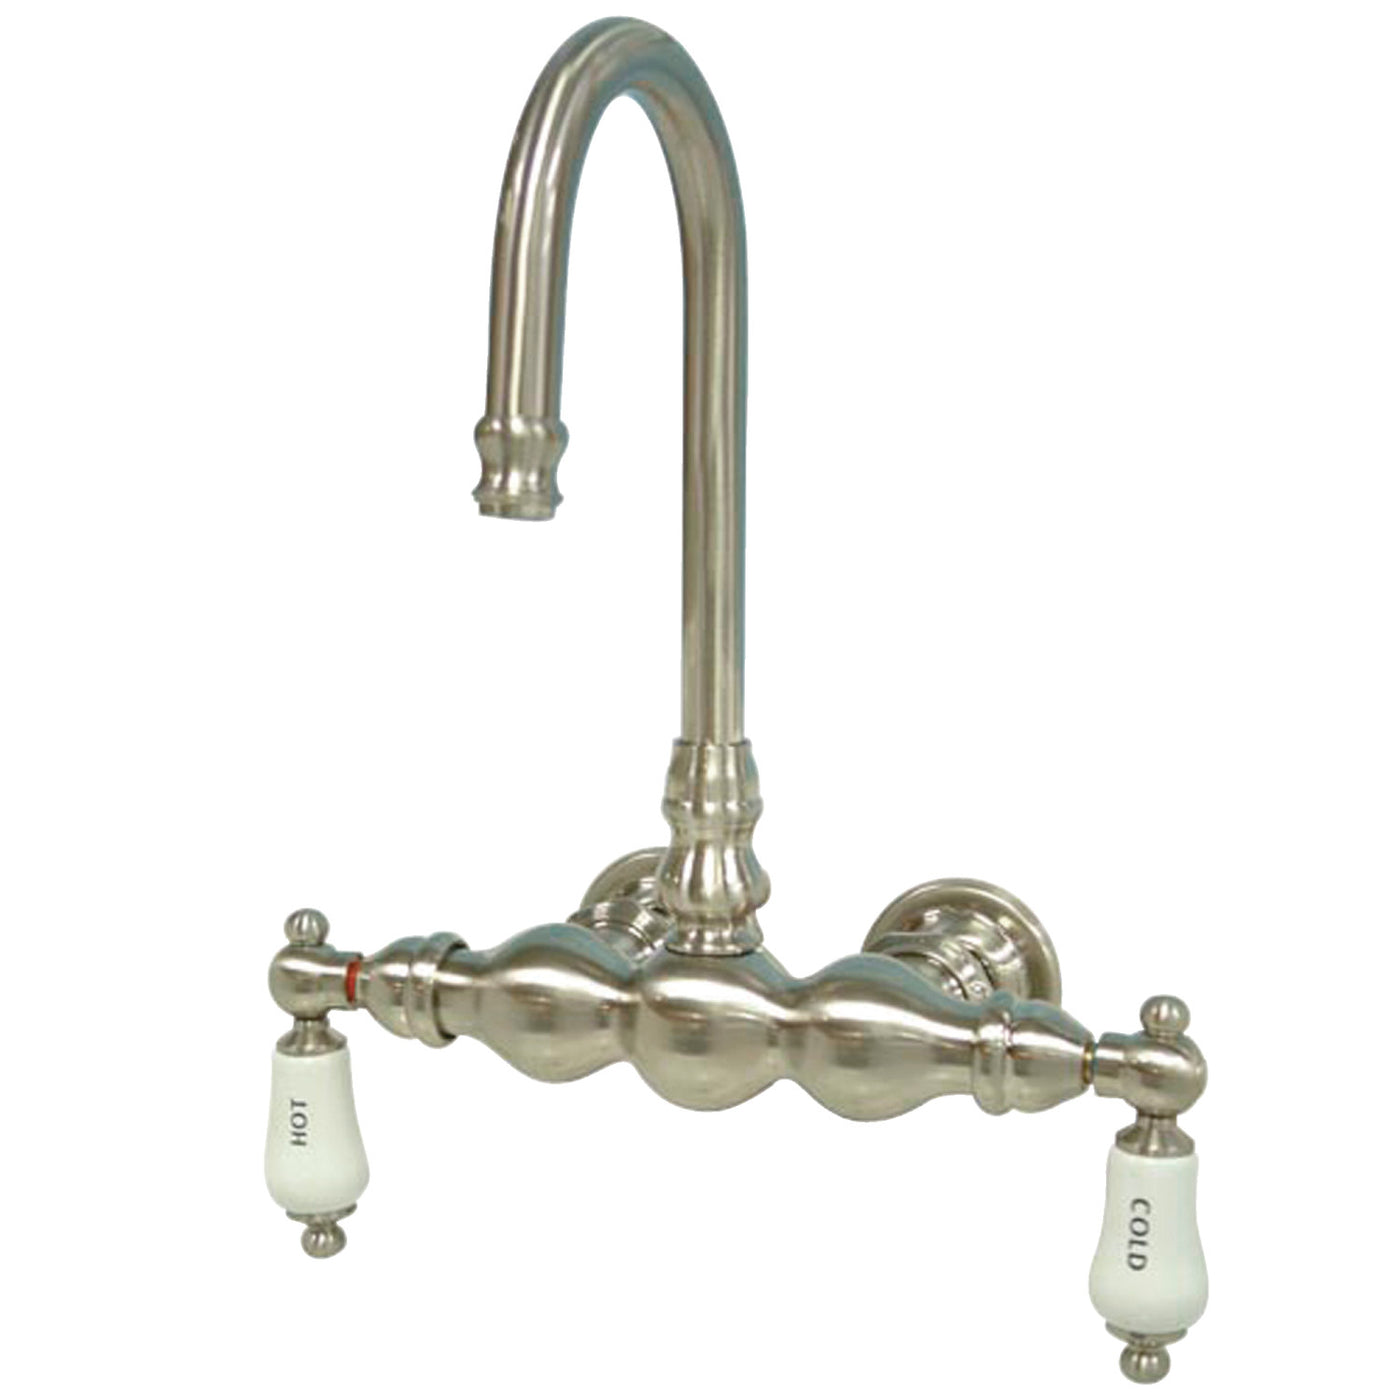 Elements of Design DT0018CL 3-3/8-Inch Wall Mount Tub Faucet, Brushed Nickel